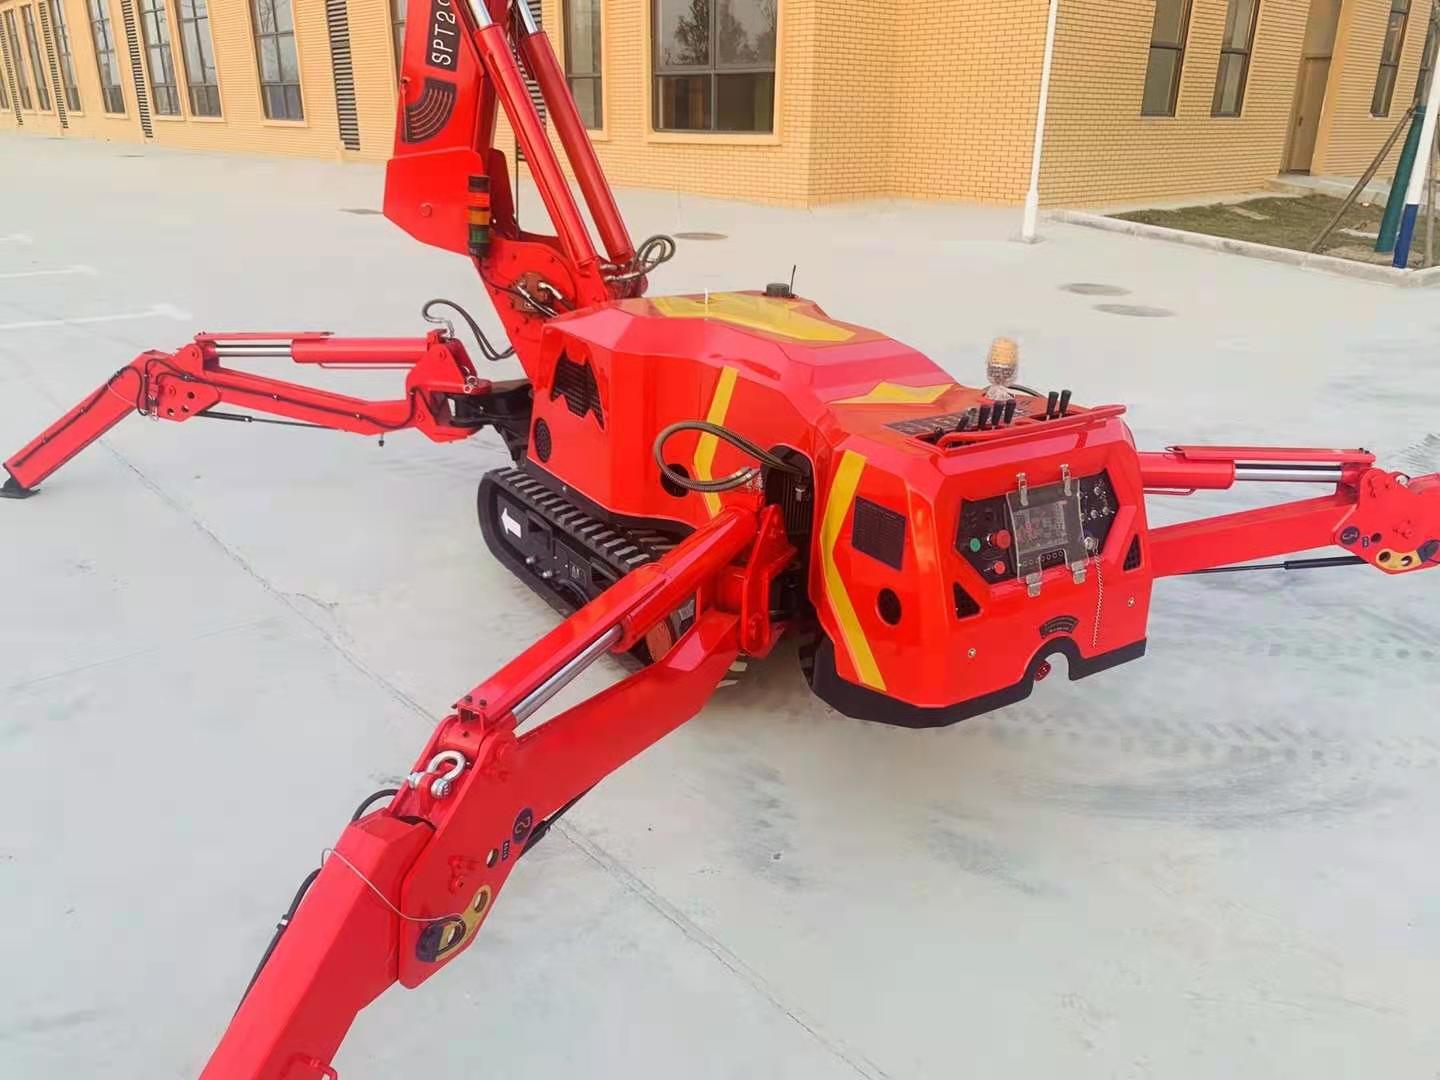 SPT299 spider crane with fly jib